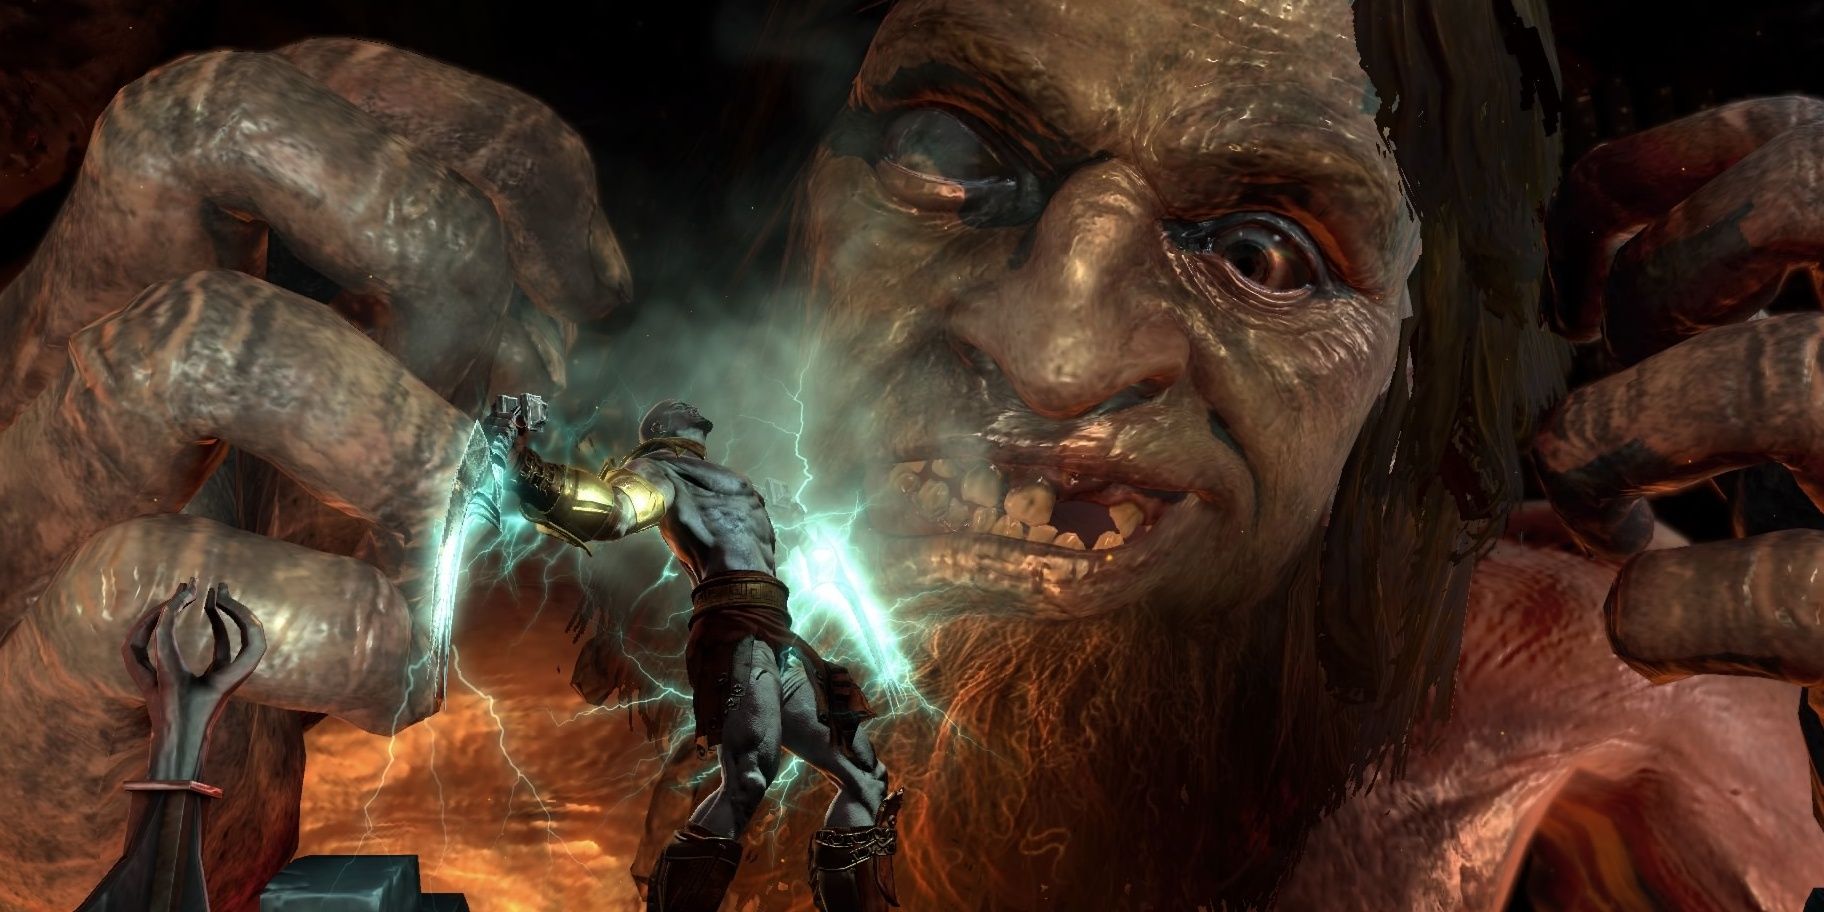 Hephaestus attempting to kill Kratos with the Nemesis Whip, in God of War 3